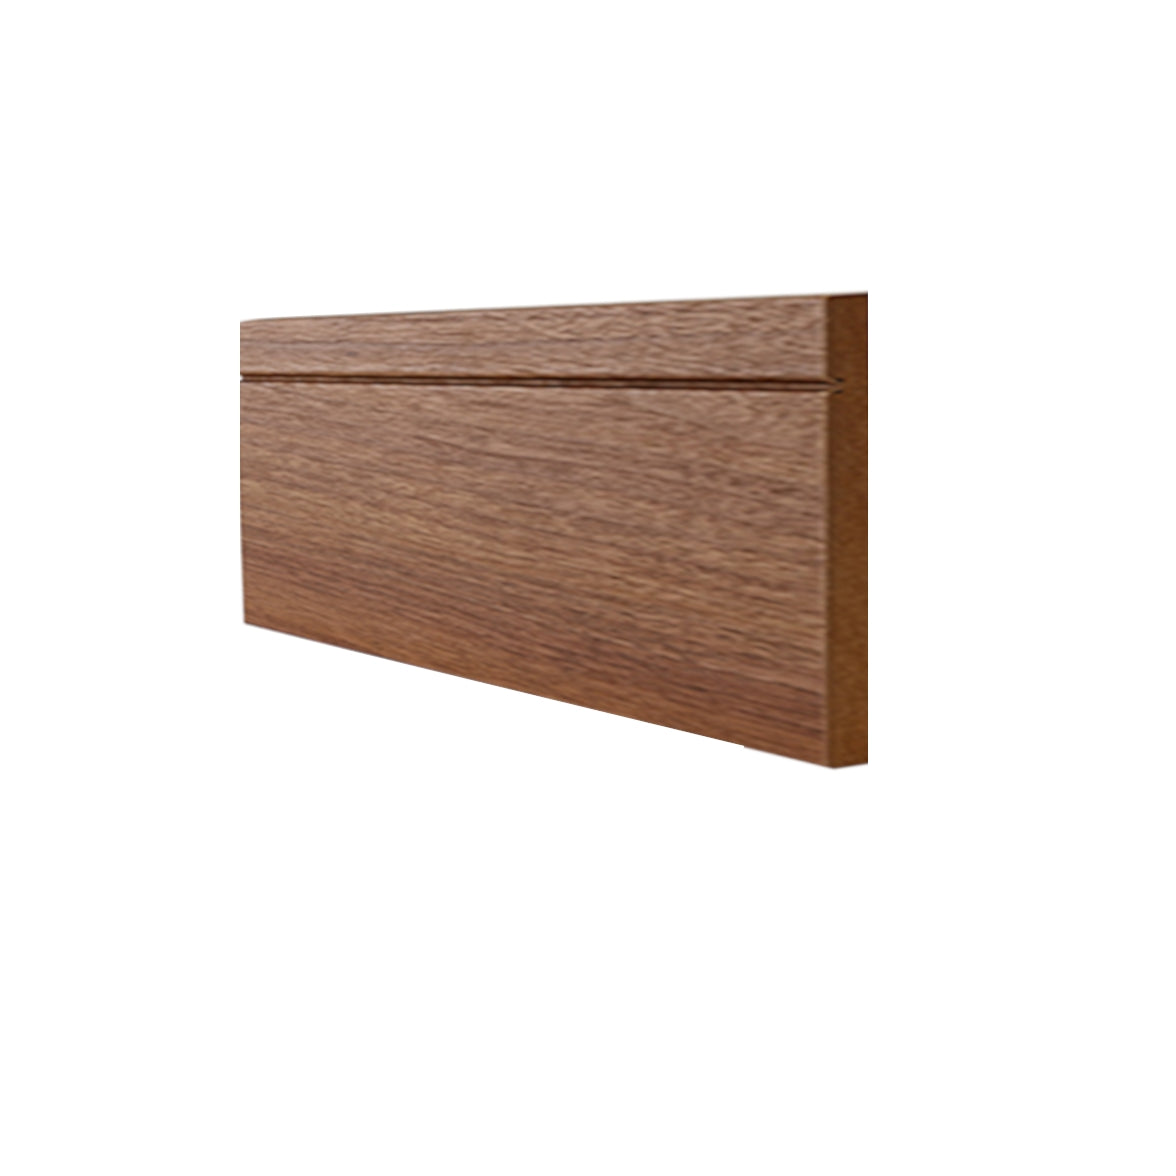 Walnut Solid Ovolo Skirting 3 metre from LoveSkirting.co.uk